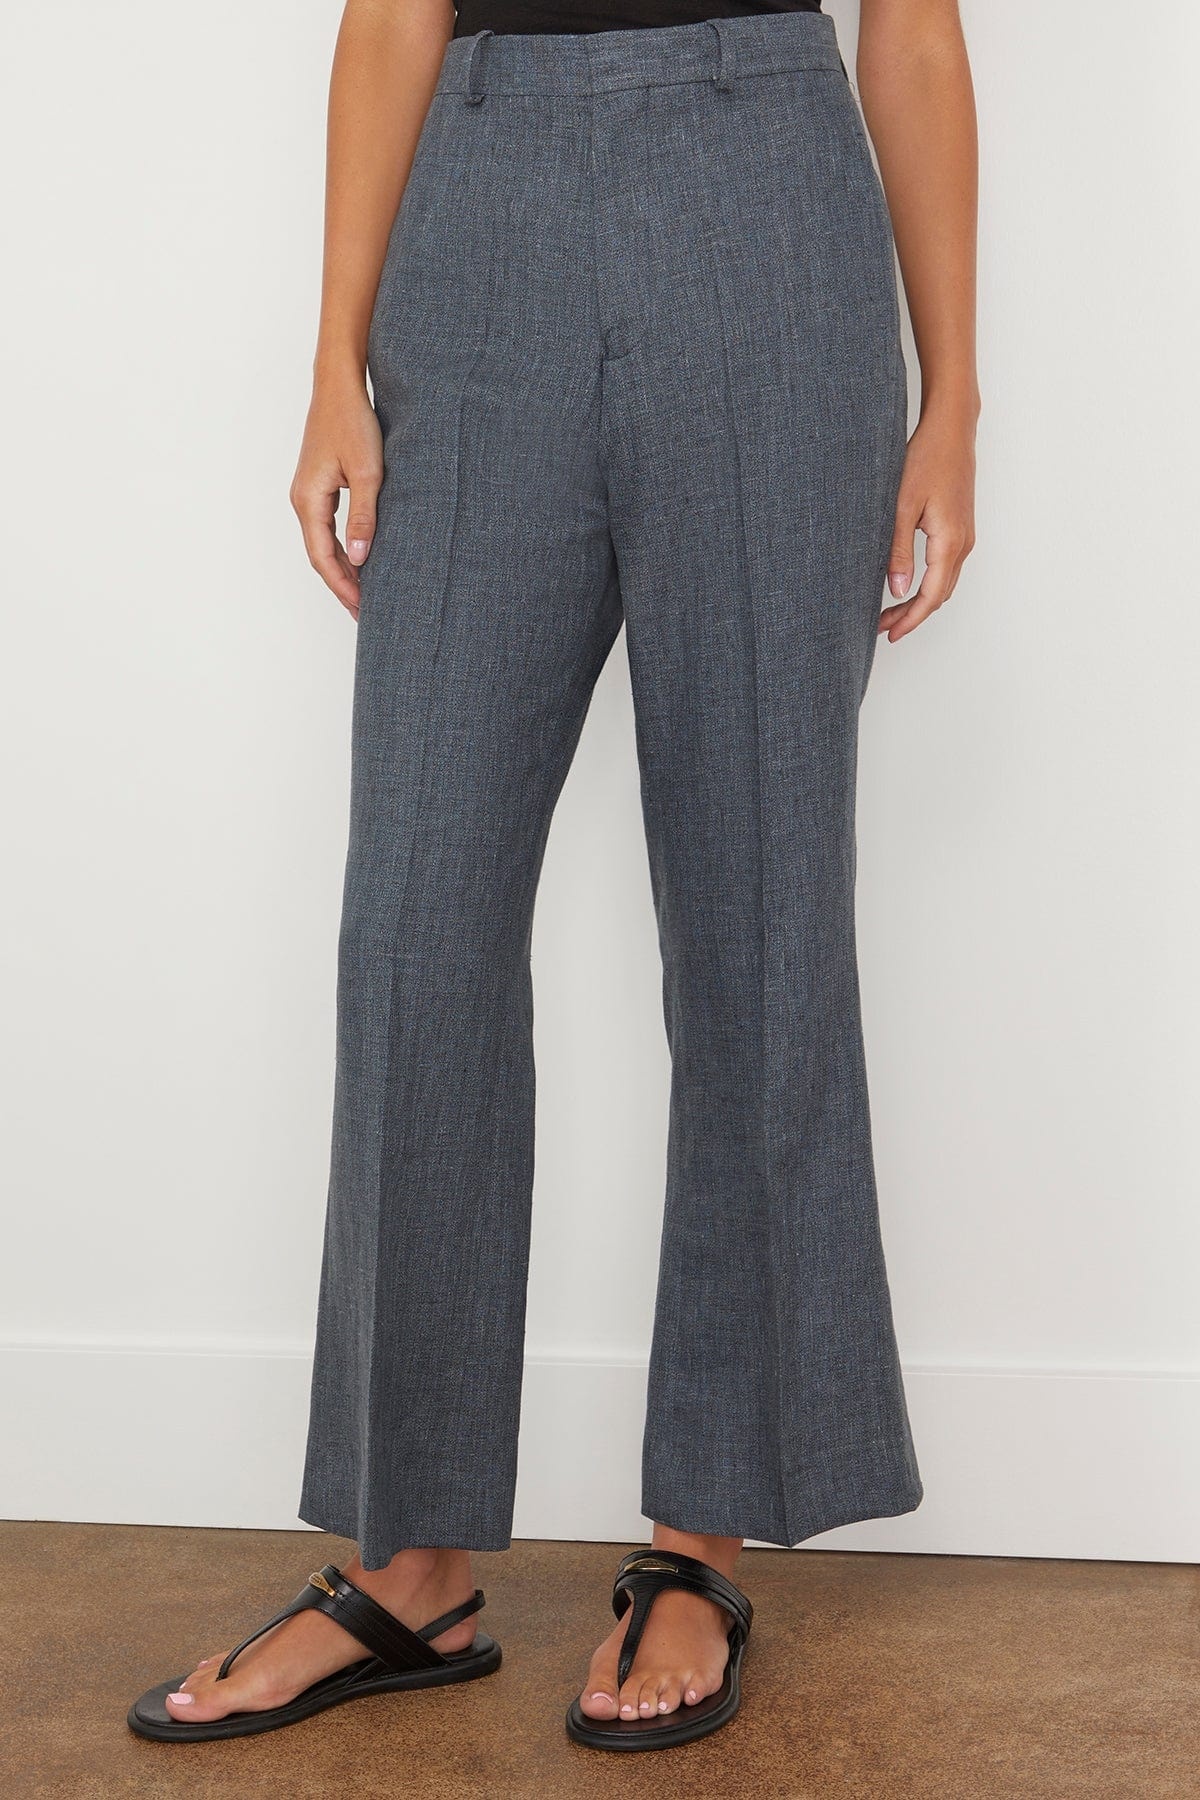 Credo Cropped Bootcut Woven Trouser in Thunder - 3